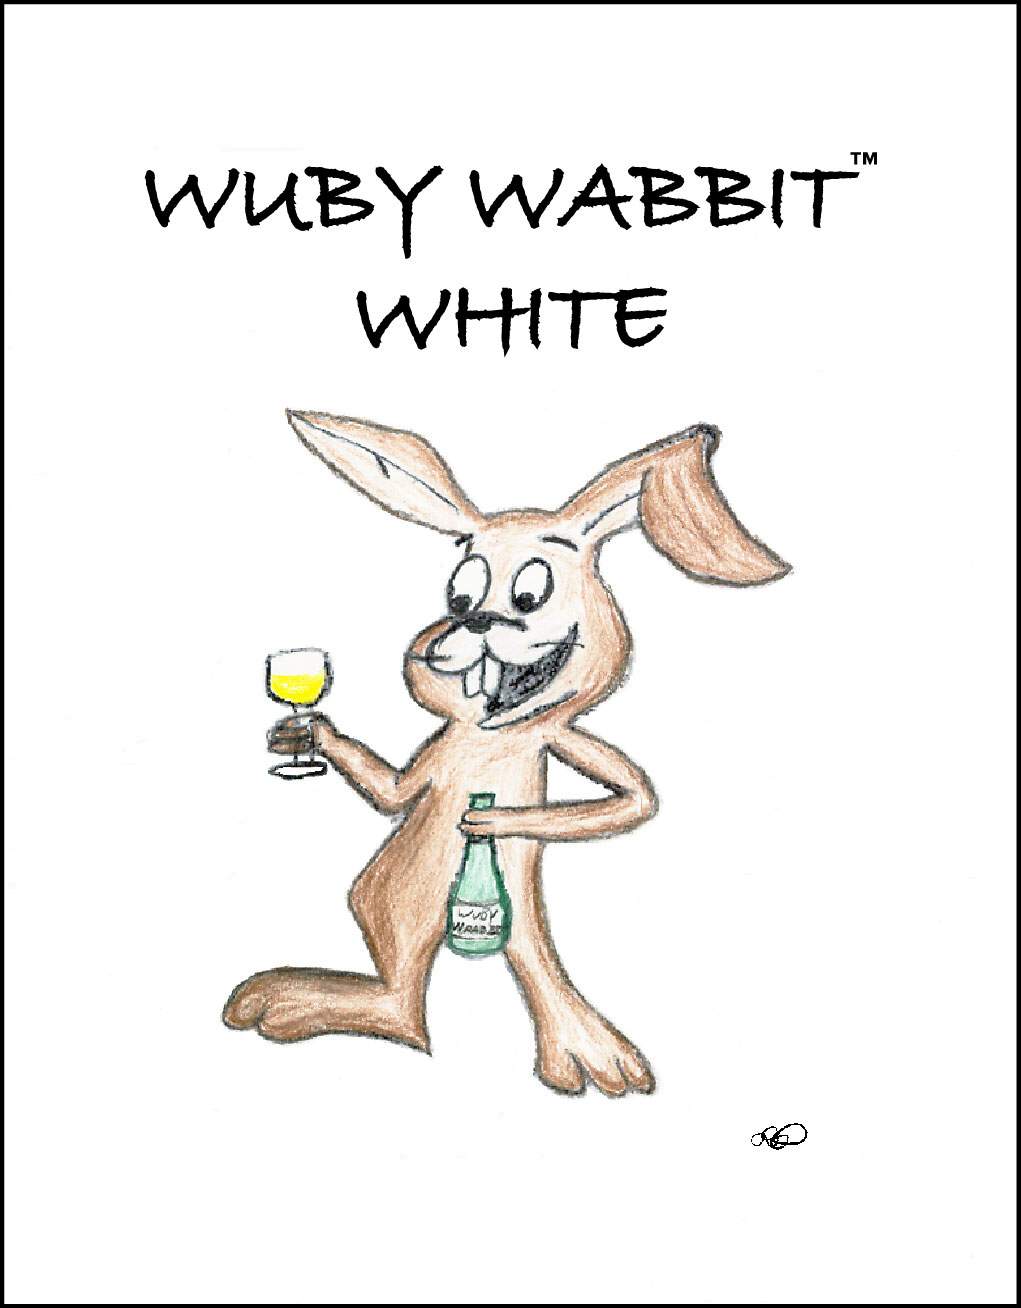 Wuby Wabbit White™ label, a Casual Drinking Wine